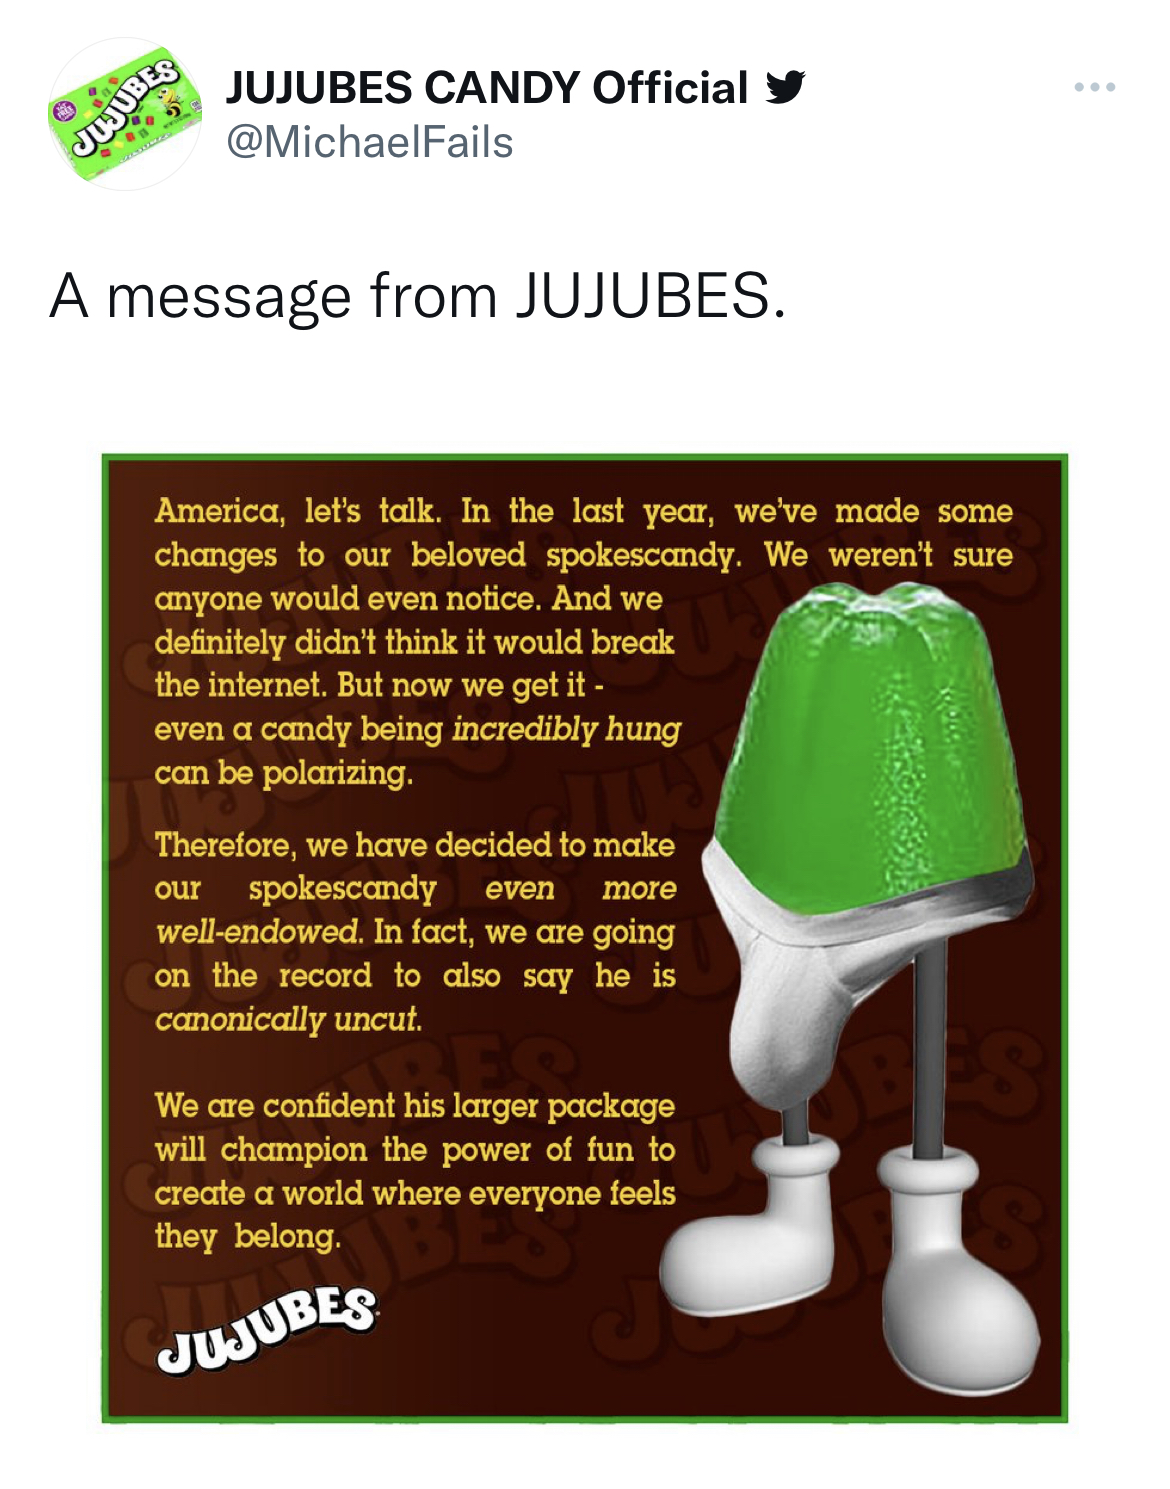 M&M's message spoofs - Jujubes Jujubes Candy Official A message from Jujubes. America, let's talk. In the last year, we've made some changes to our beloved spokescandy. We weren't sure anyone would even notice. And we definitely didn't think it would brea